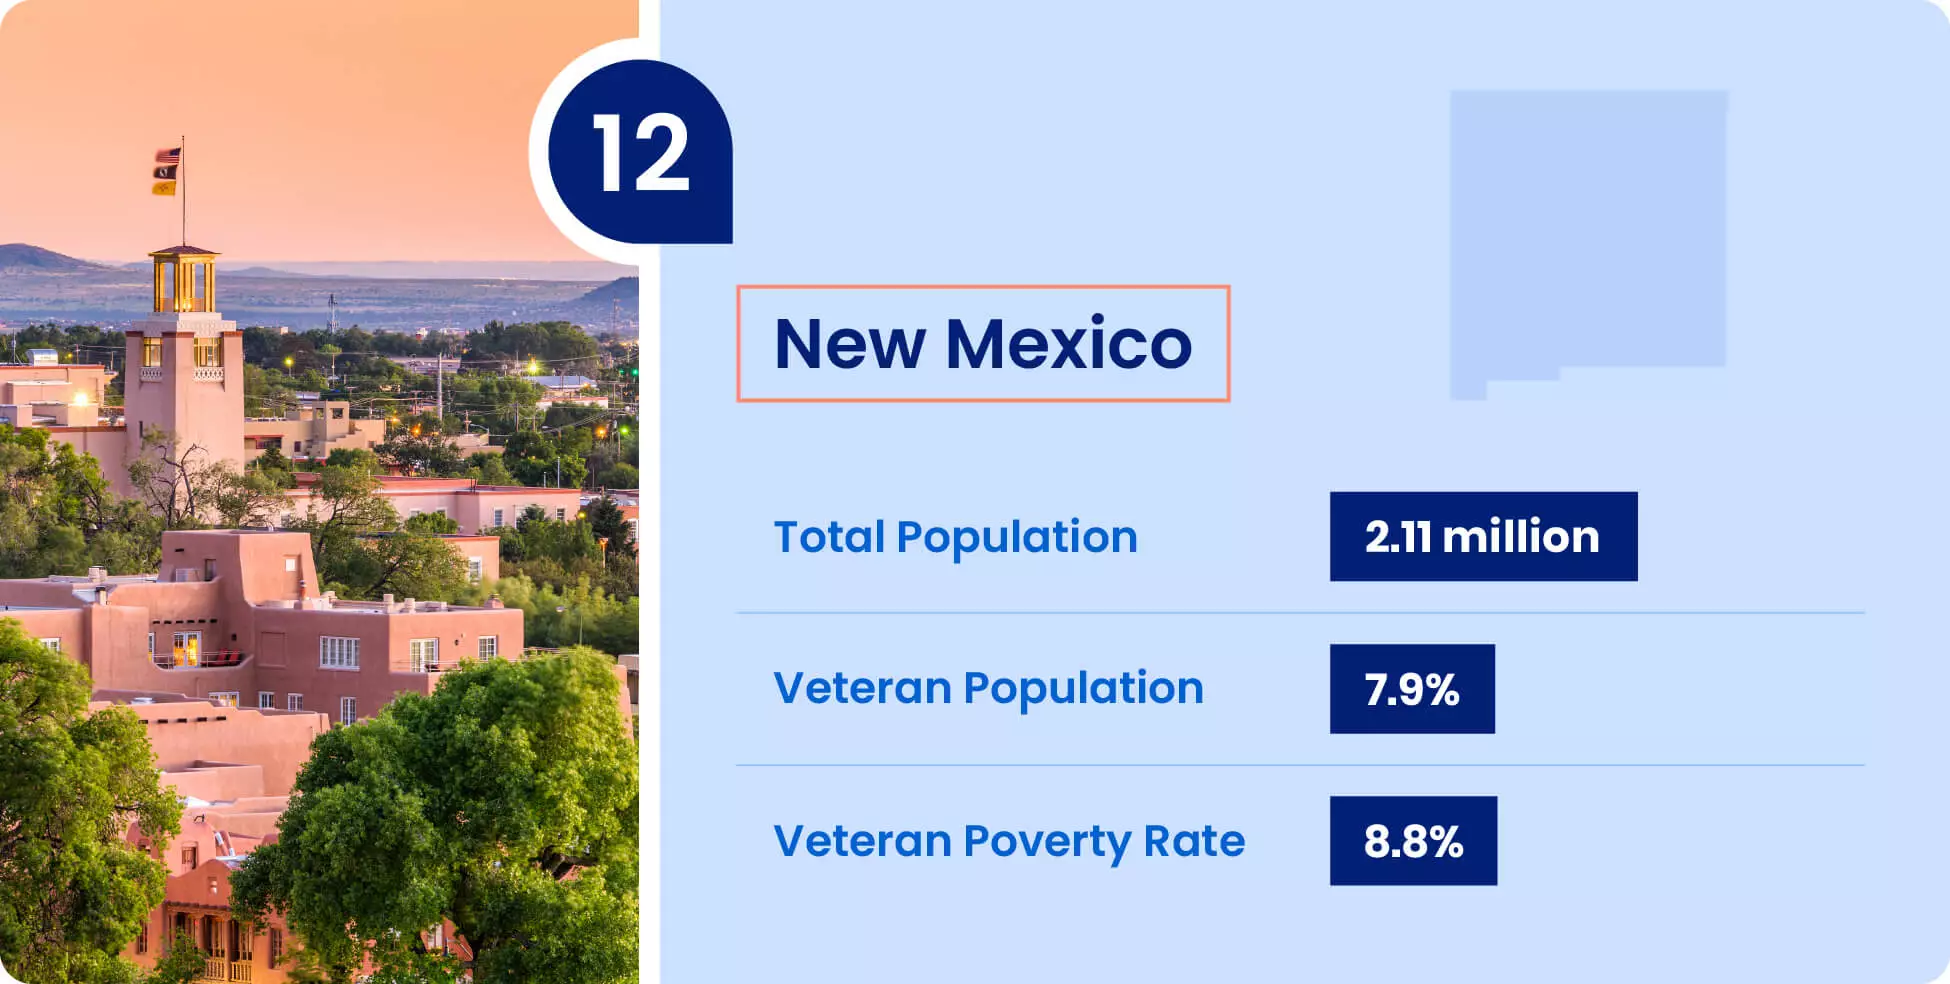 Image shows key information for military retirees thinking of moving to New Mexico.